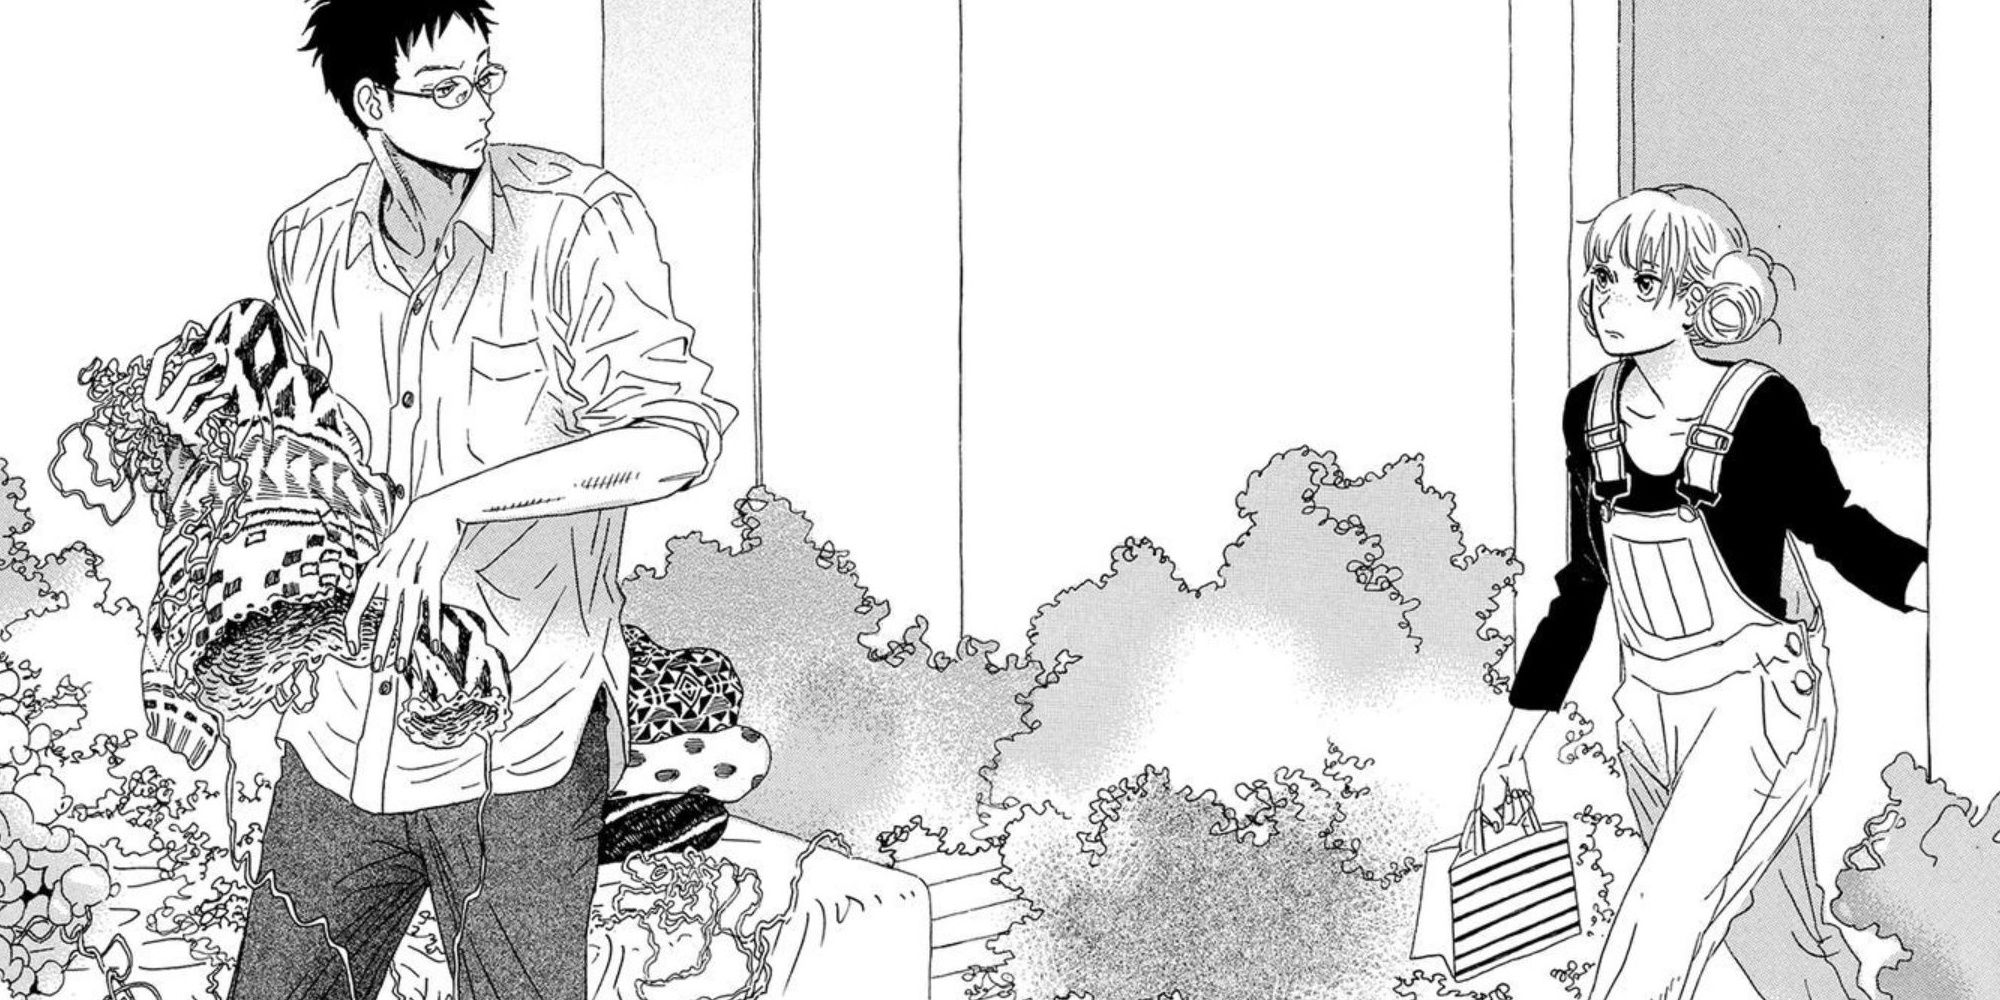 Sekine holding a partially frogged knitted sweater while Kisaragi chases him